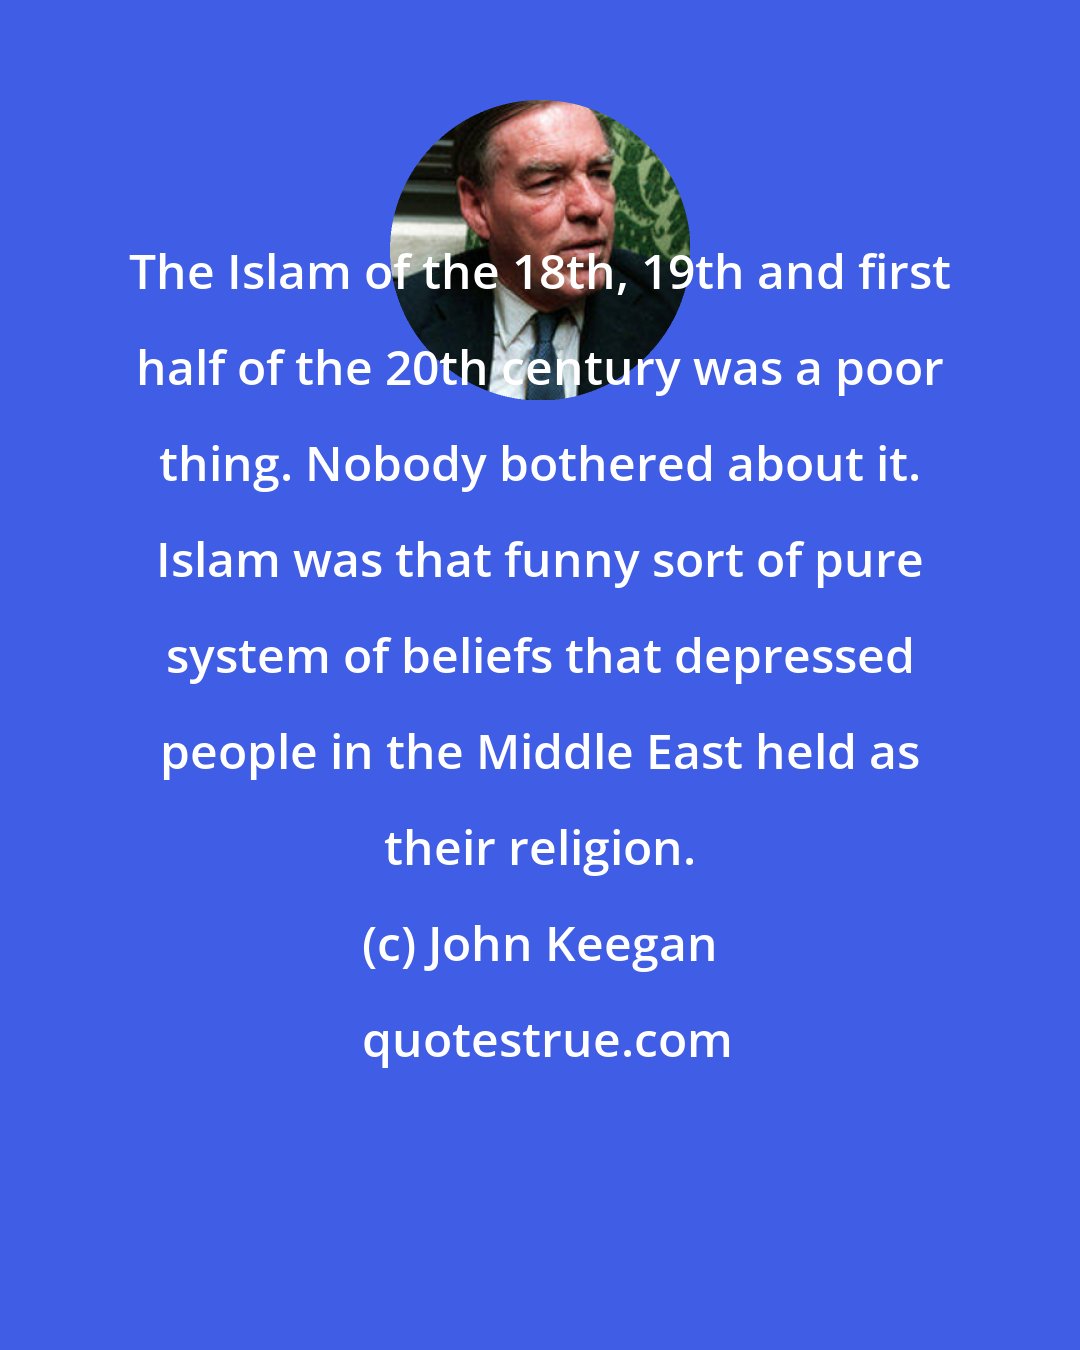 John Keegan: The Islam of the 18th, 19th and first half of the 20th century was a poor thing. Nobody bothered about it. Islam was that funny sort of pure system of beliefs that depressed people in the Middle East held as their religion.